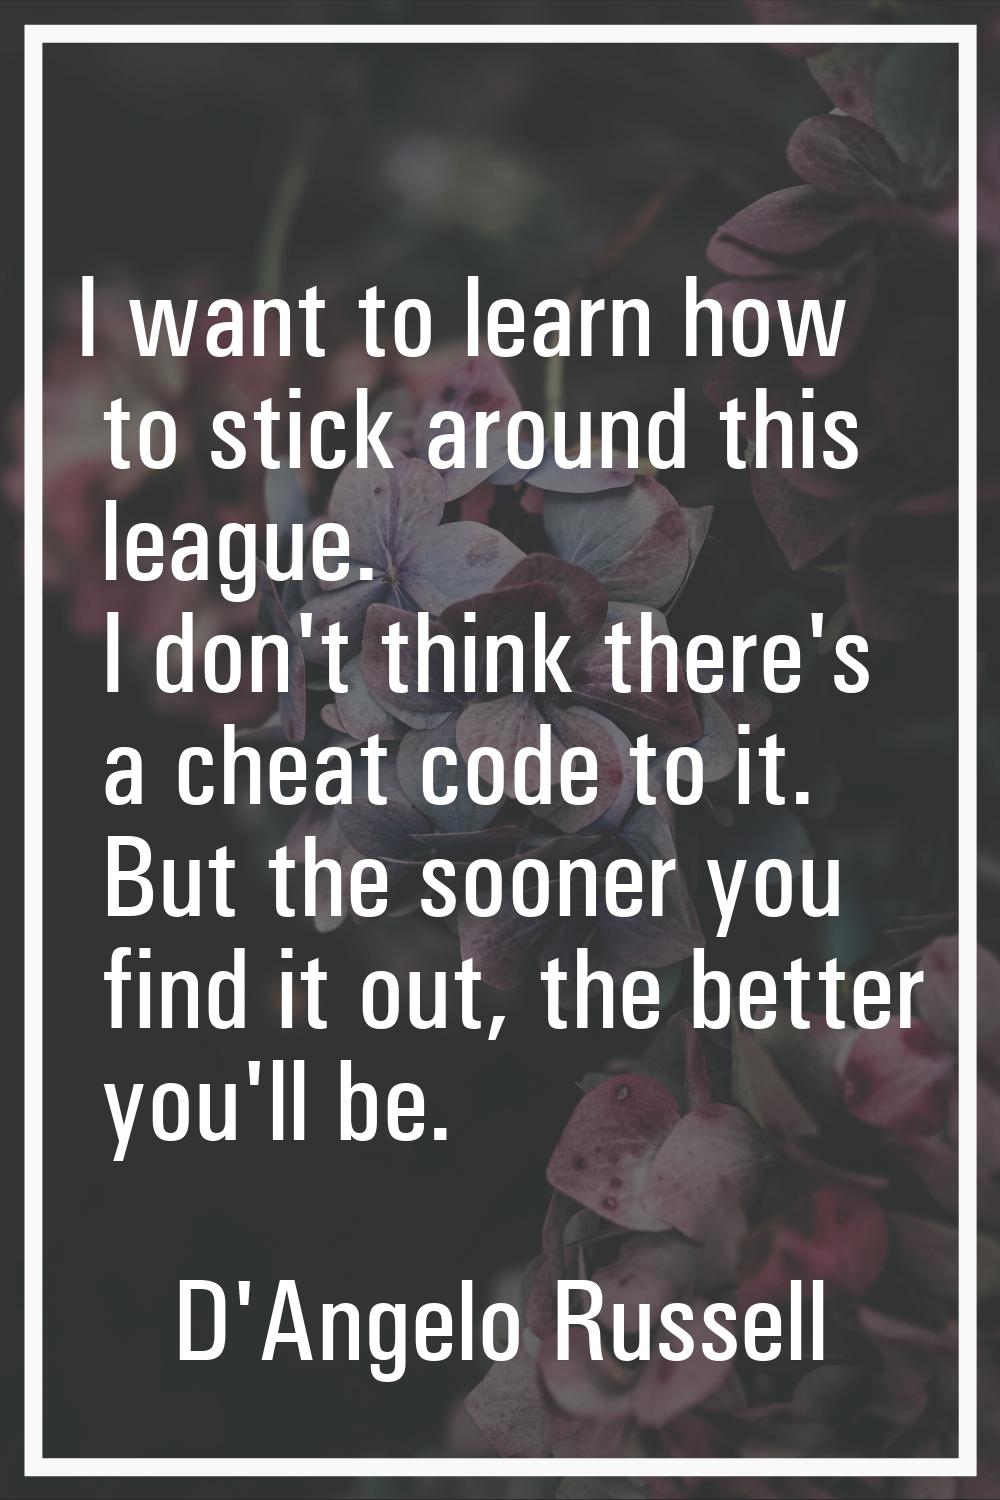 I want to learn how to stick around this league. I don't think there's a cheat code to it. But the 